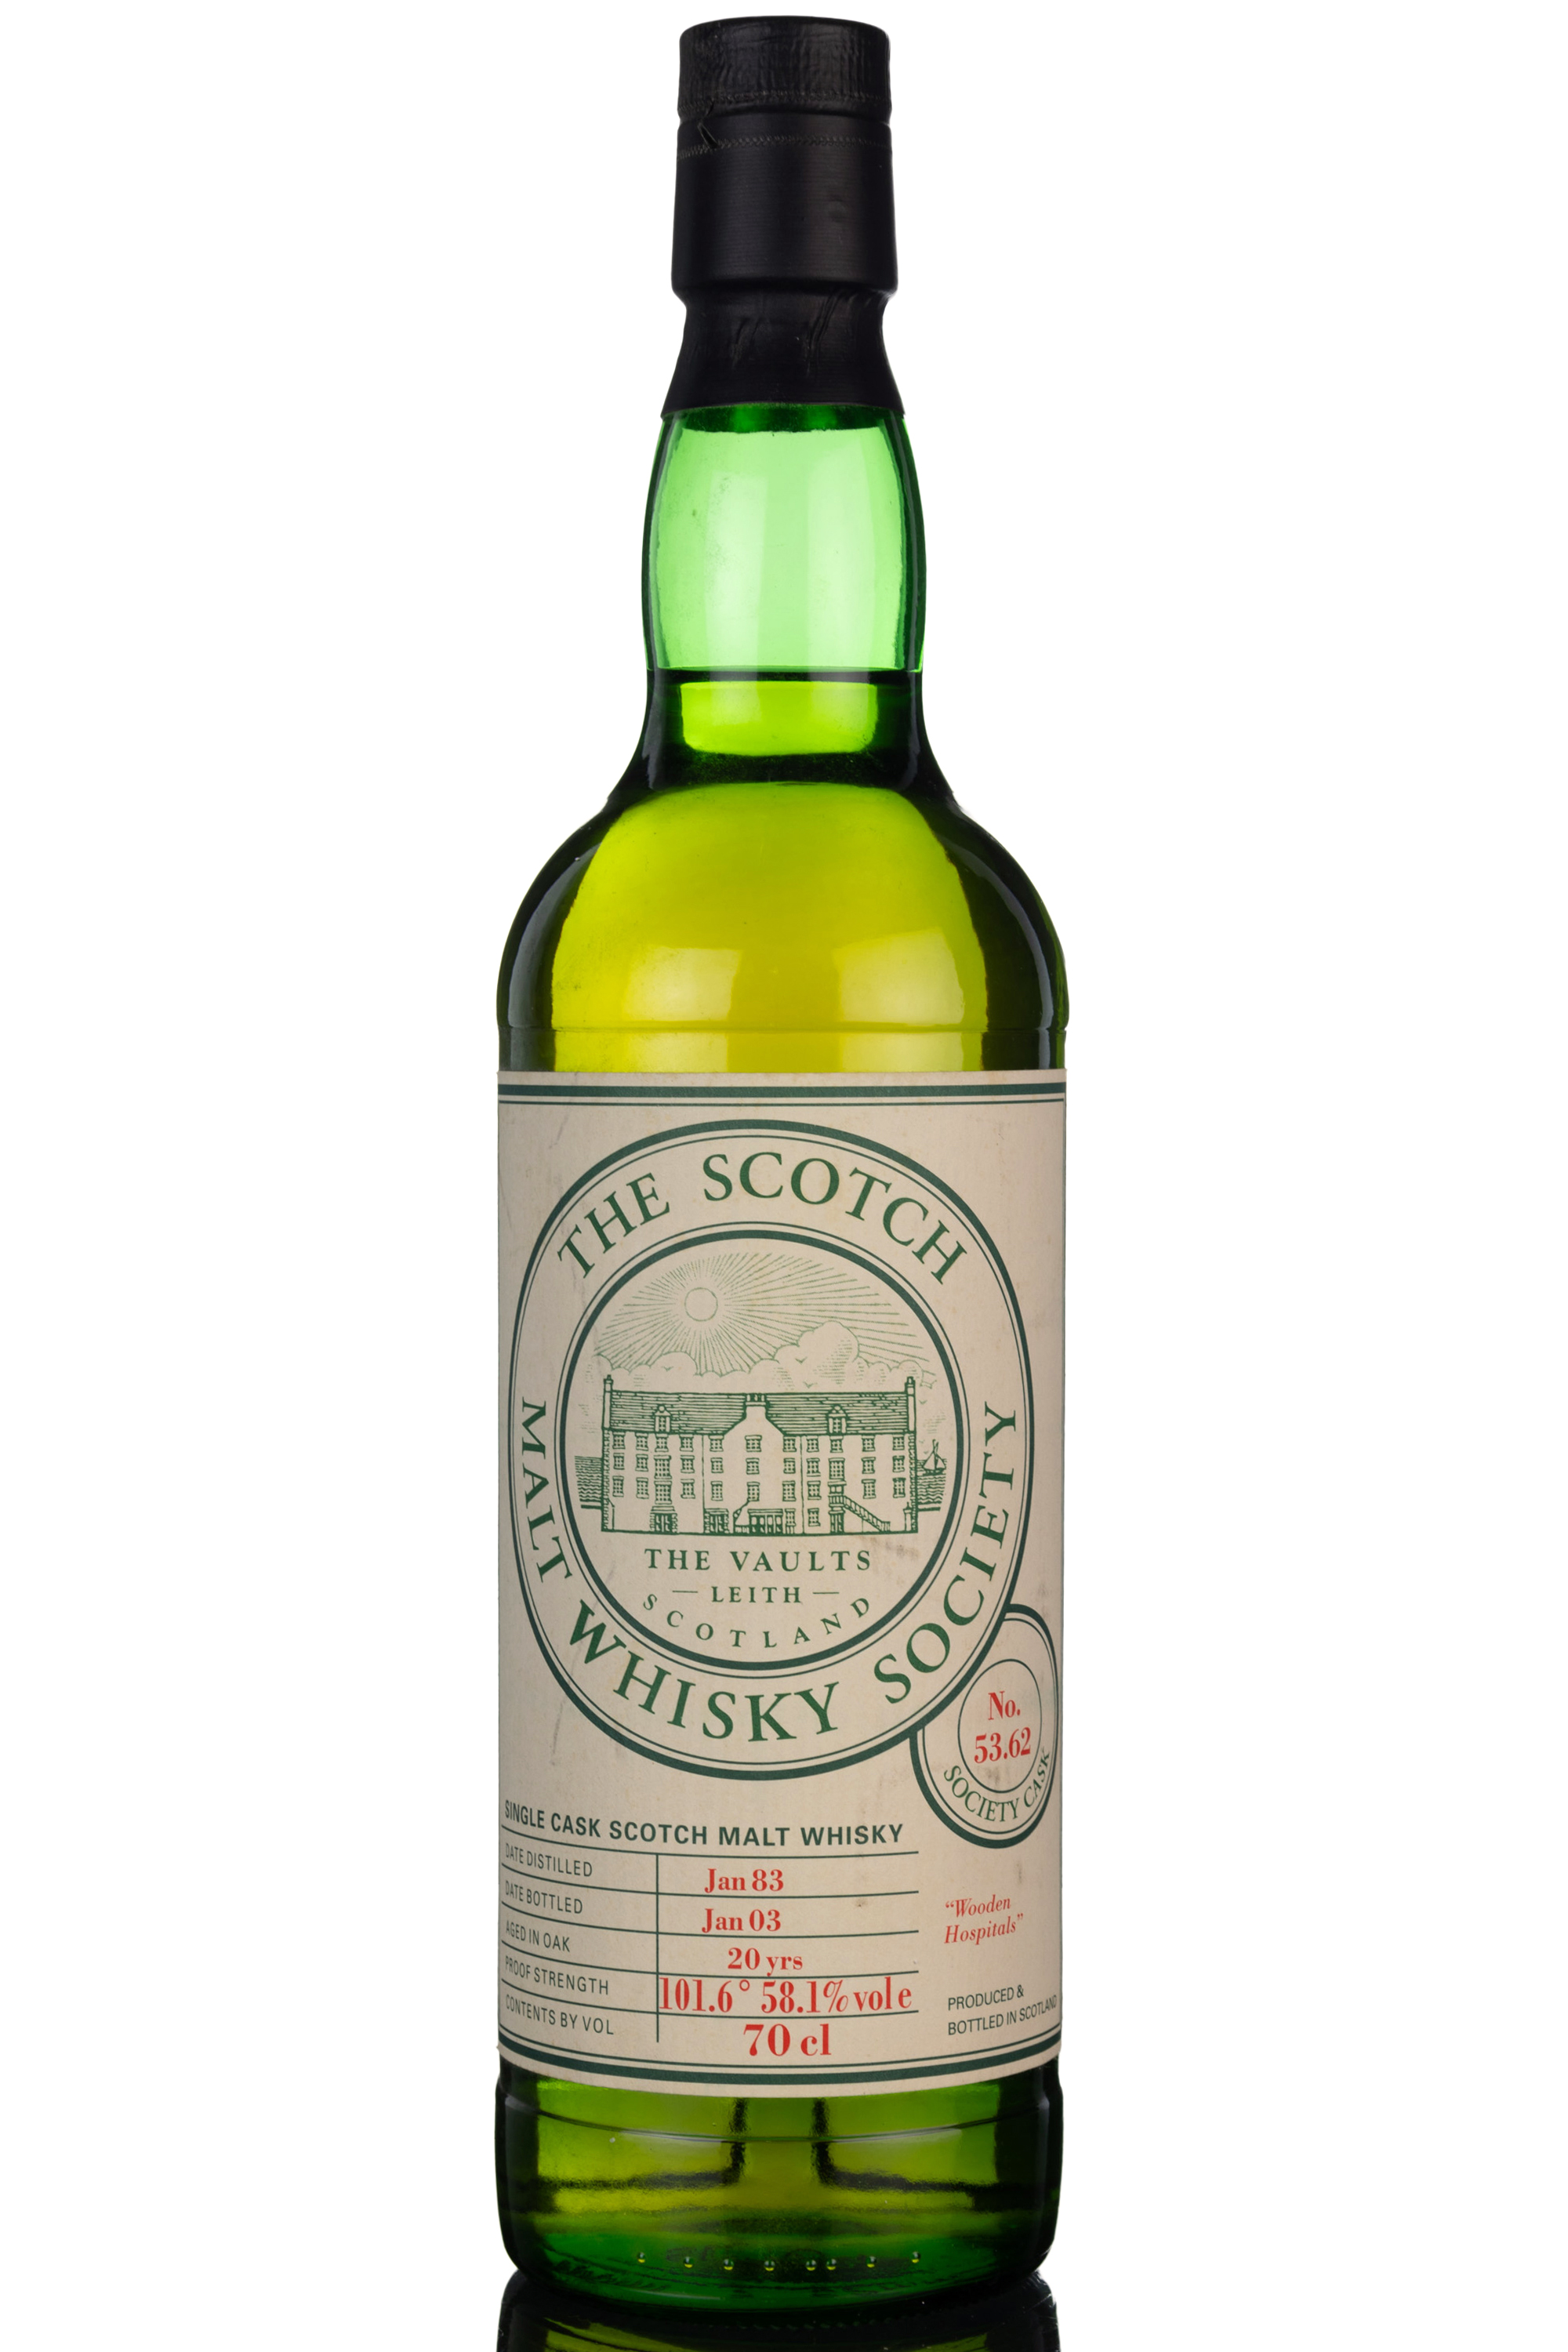 Caol Ila 1983-2003 - 20 Year Old - SMWS 53.62 - Wooden Hospitals